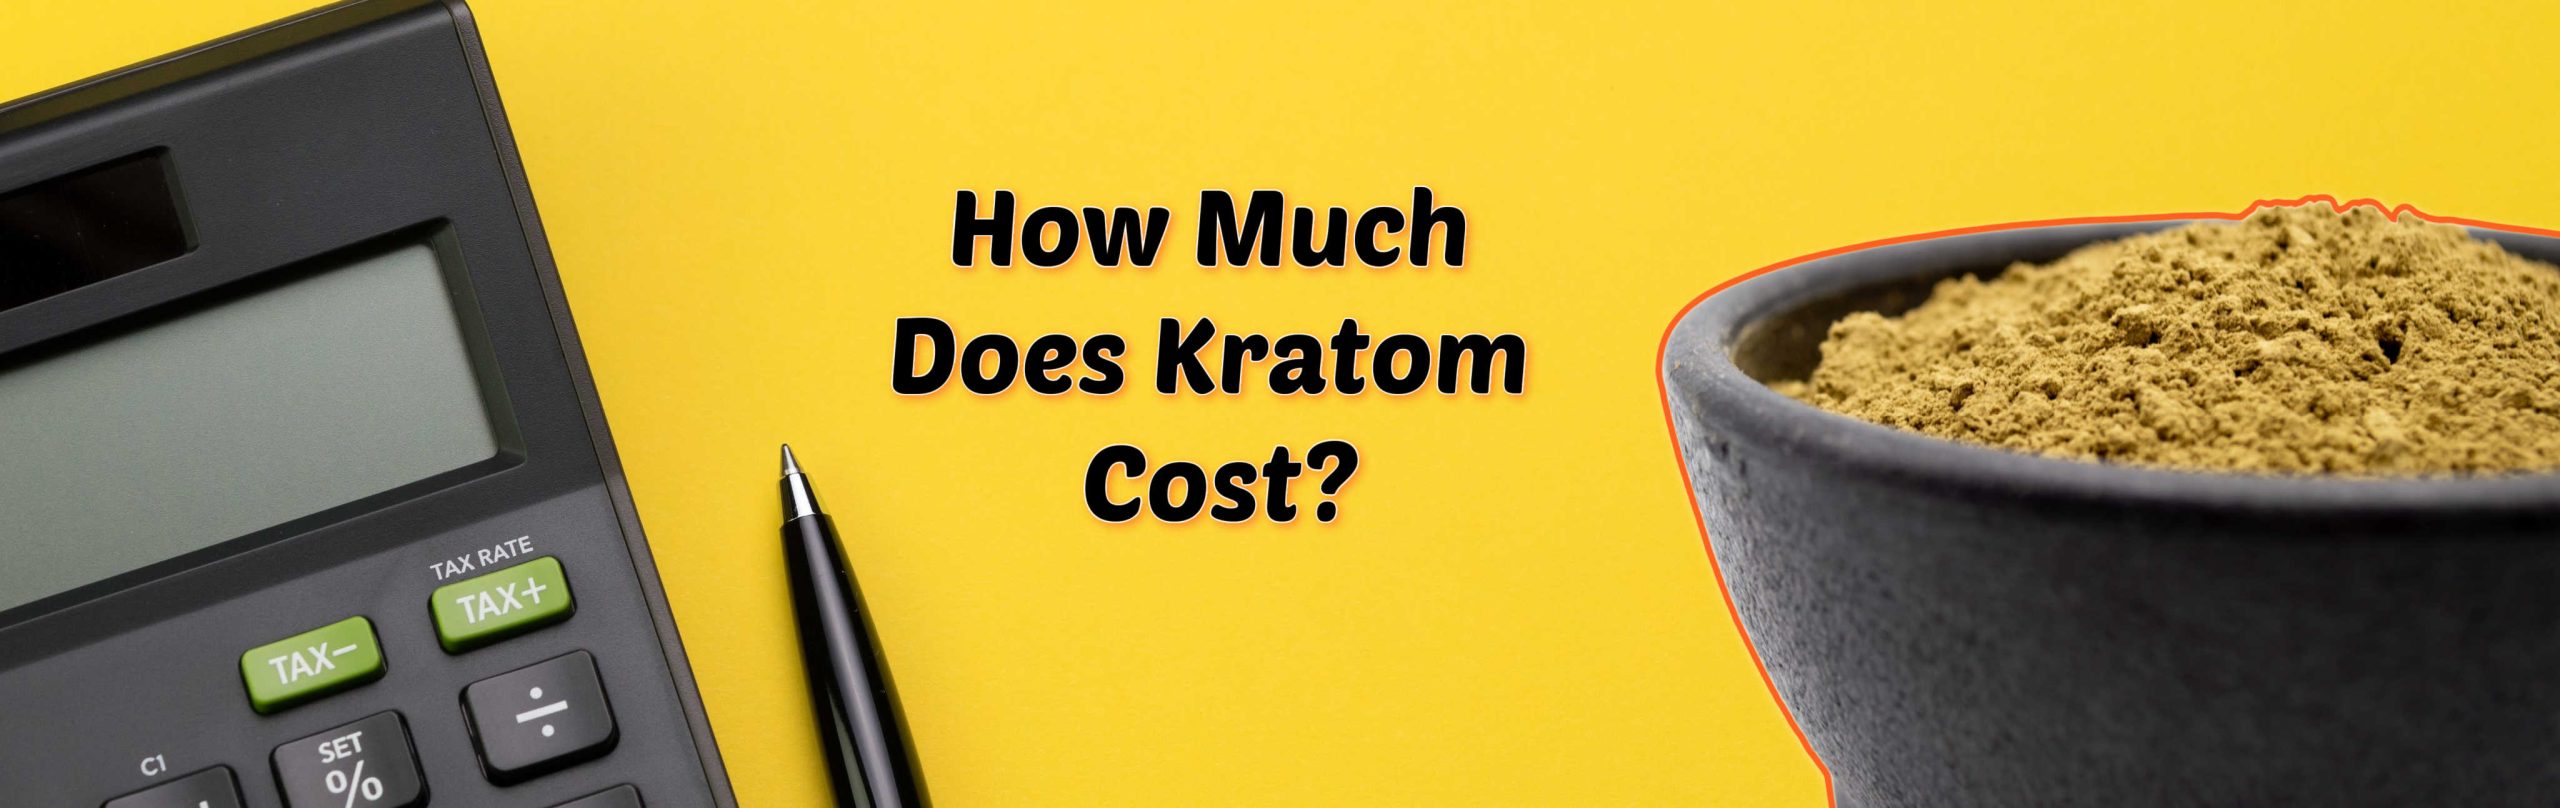 image of how much does kratom cost